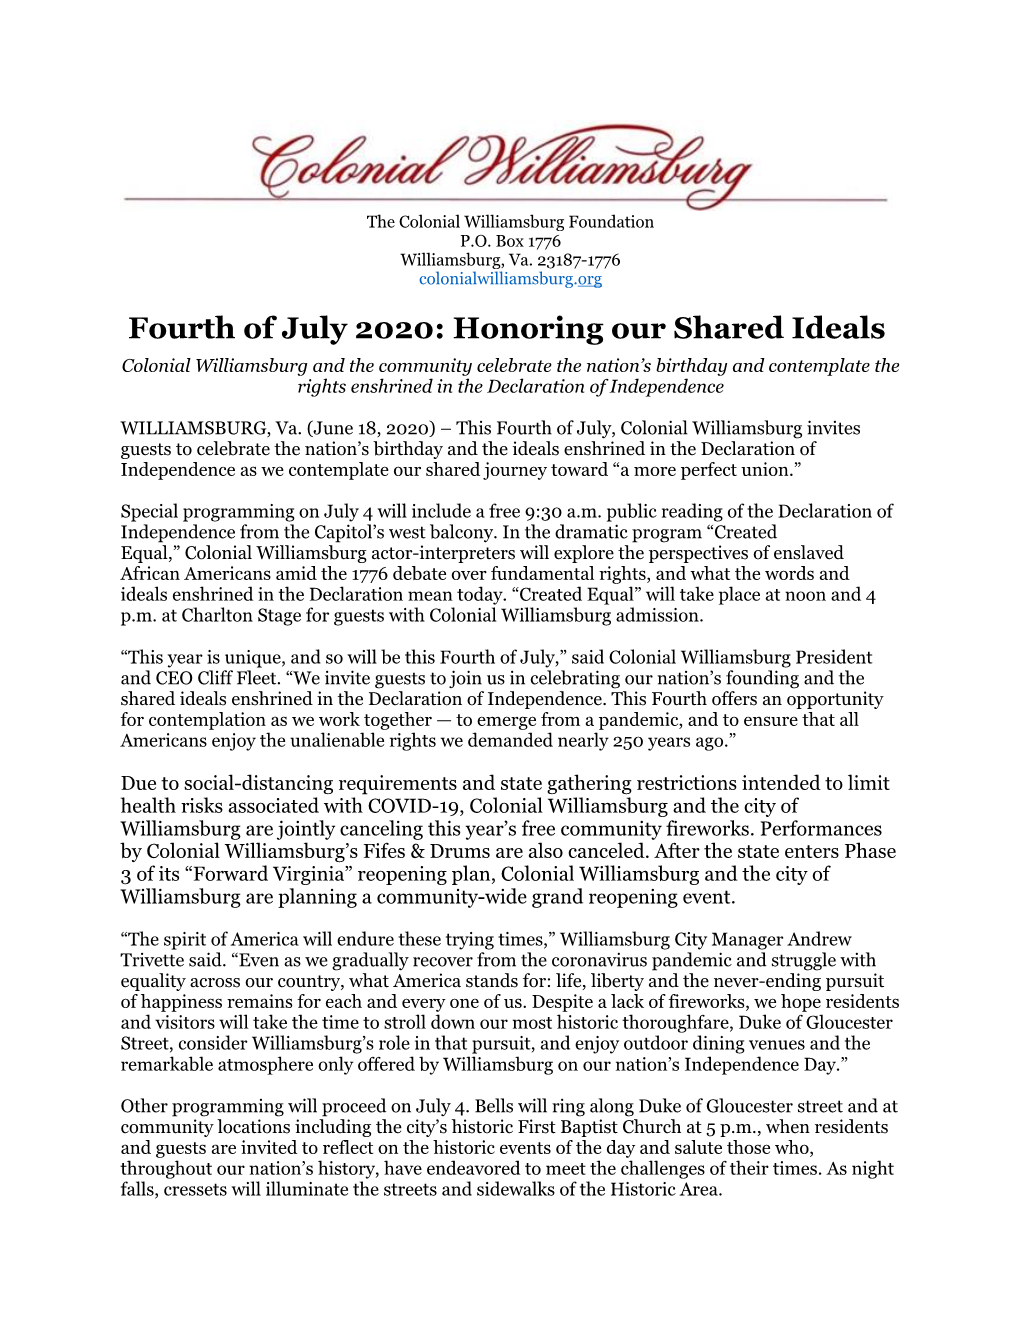 Fourth of July 2020: Honoring Our Shared Ideals